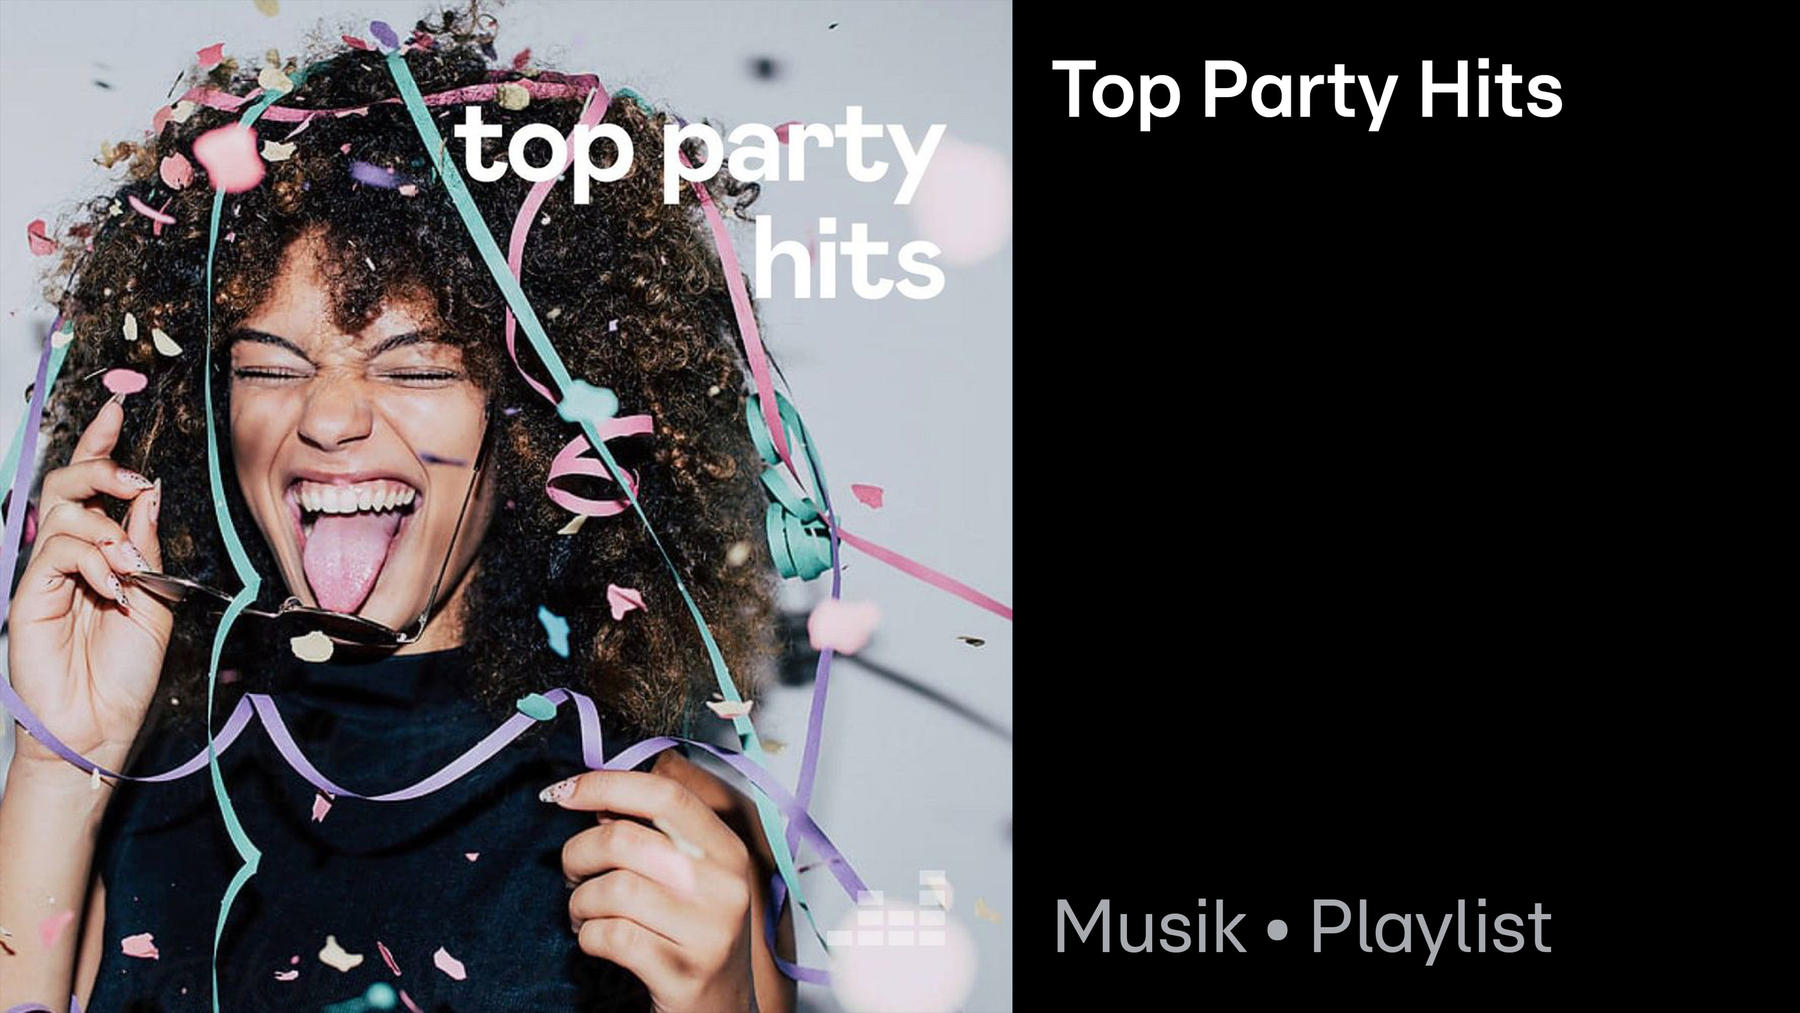 Top Party Hits